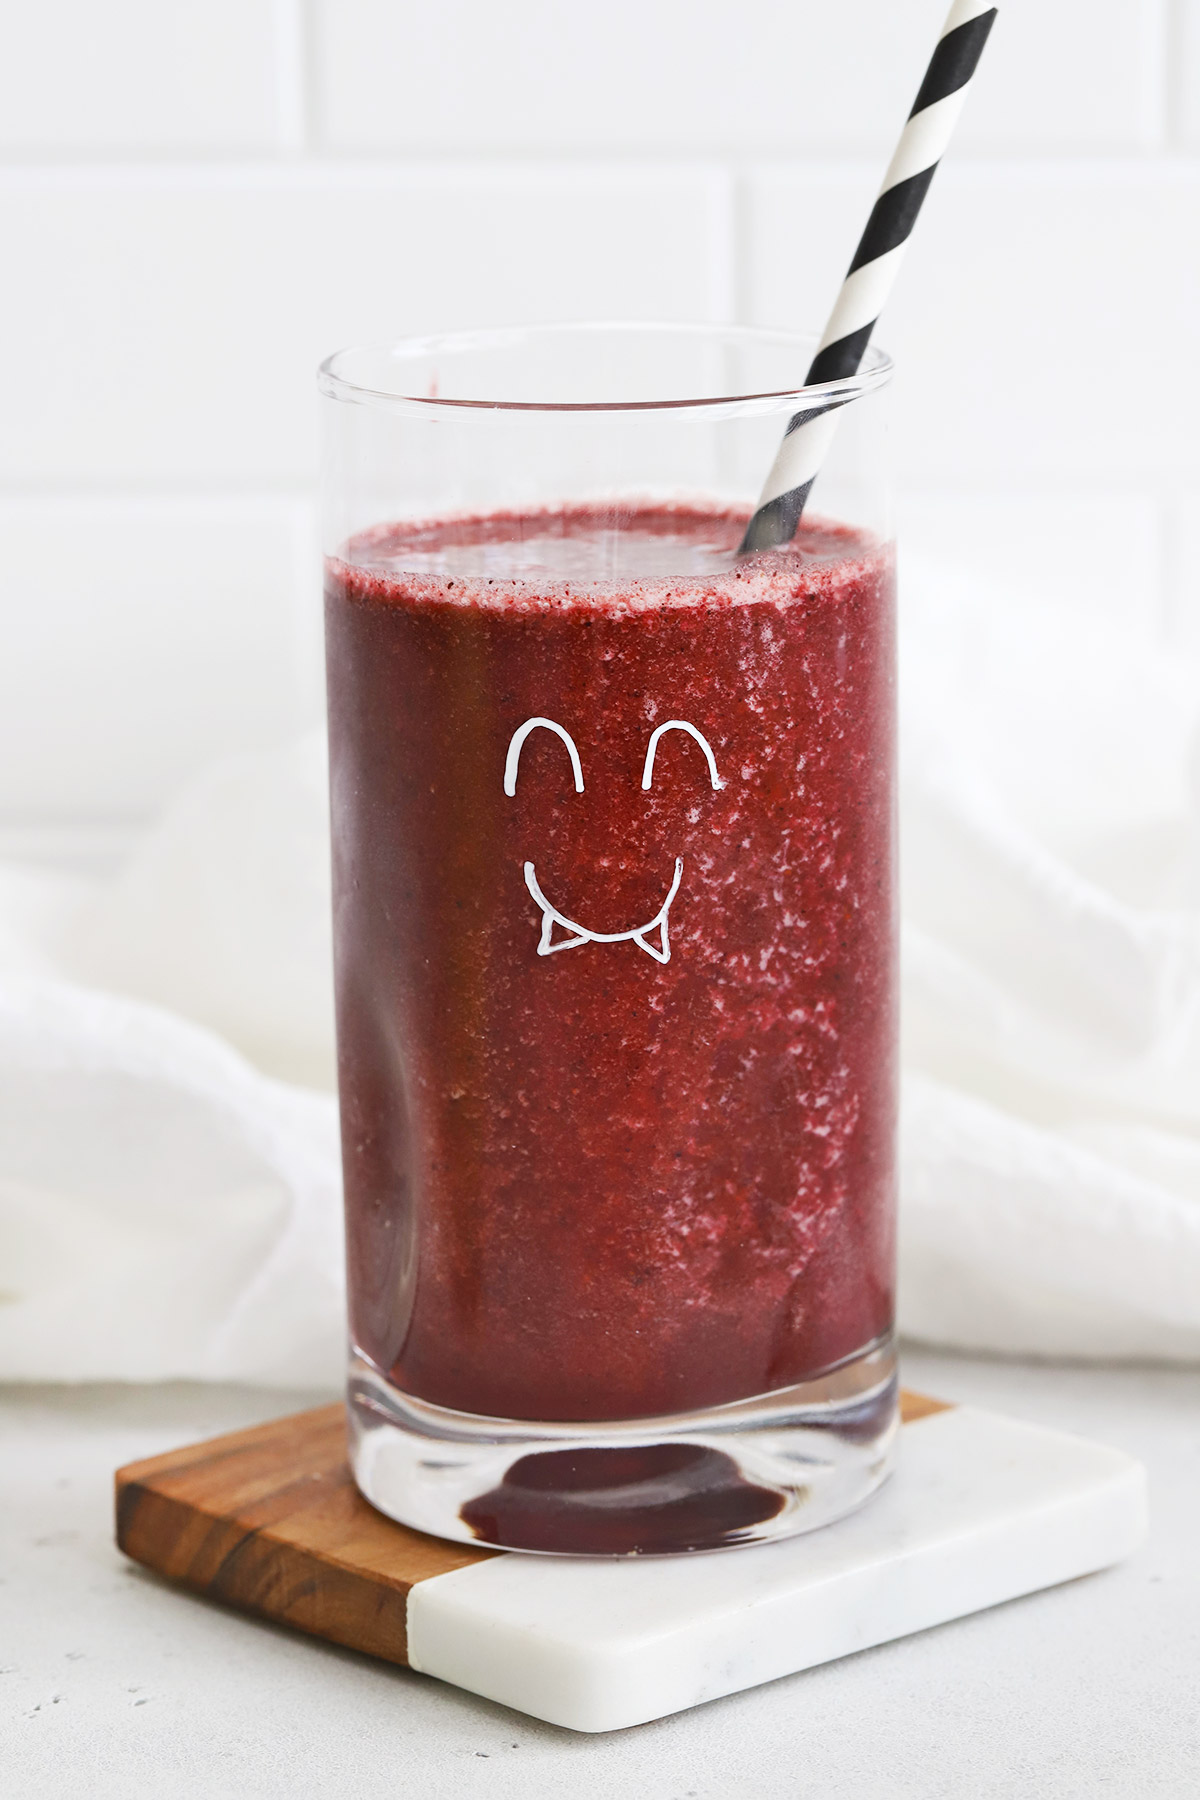 Blueberry Peach Smoothie in a glass with a monster face drawn on the glass